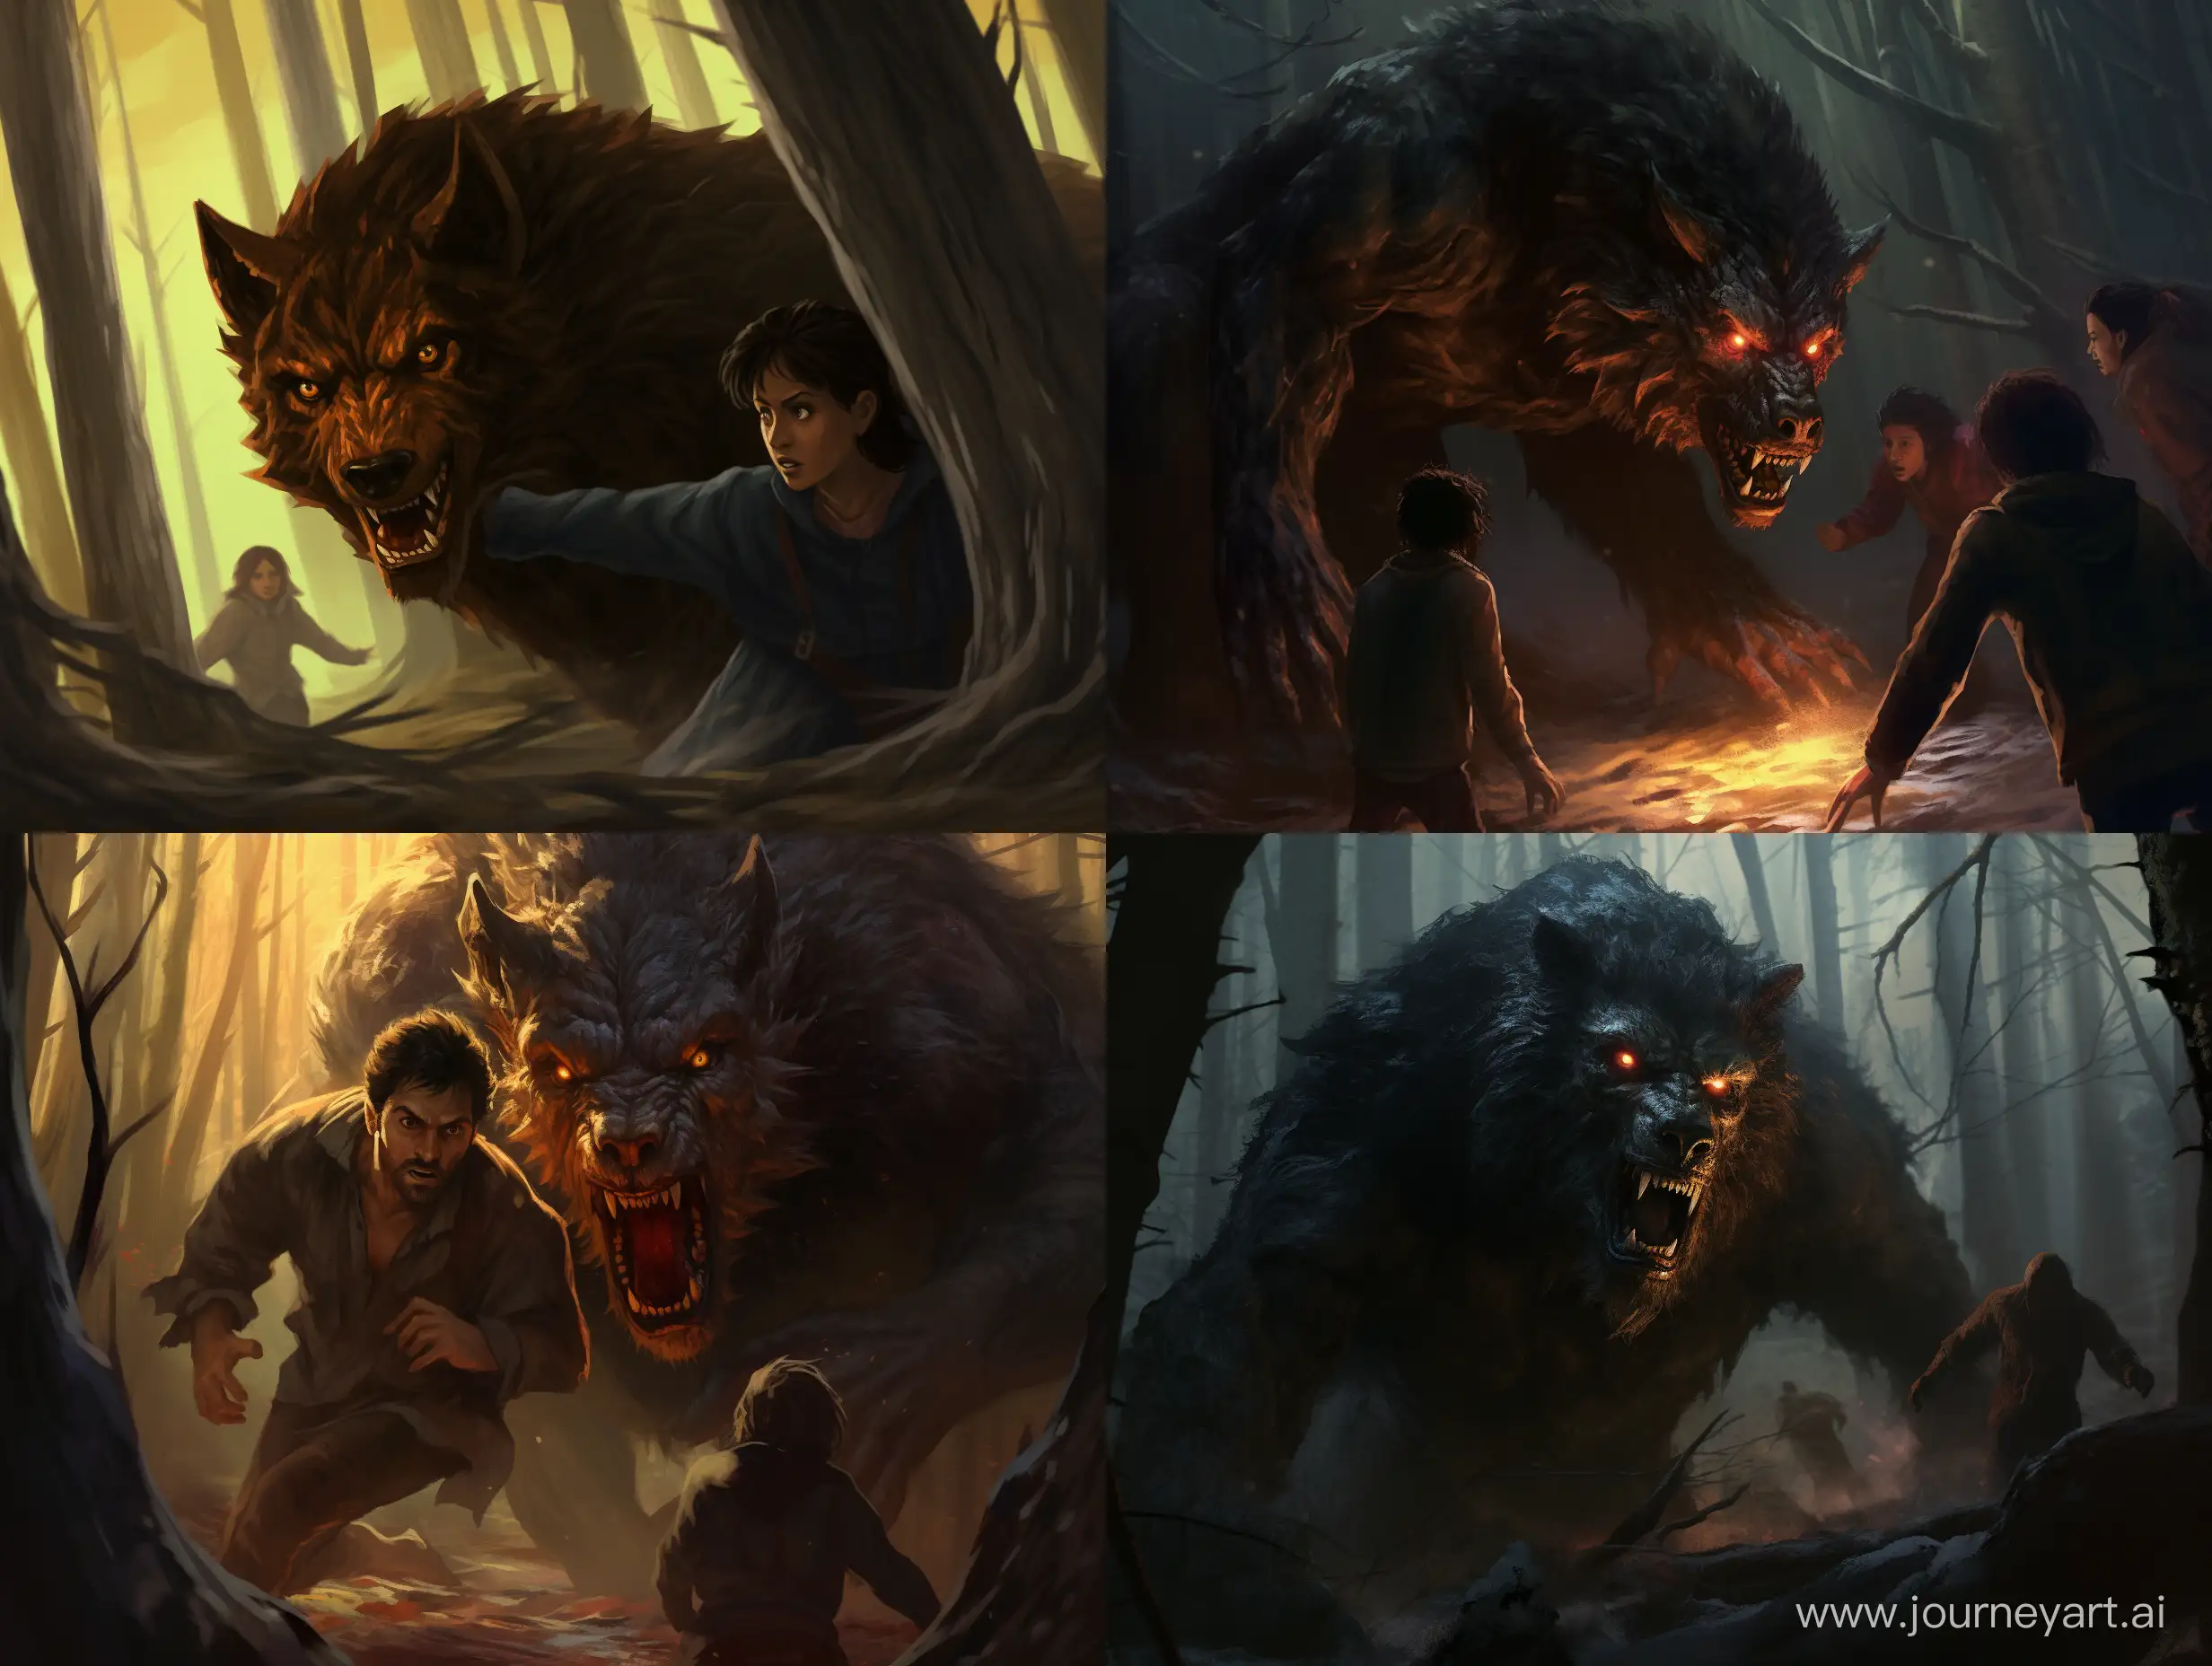 Friends-Confront-Werewolf-in-Enchanted-Forest